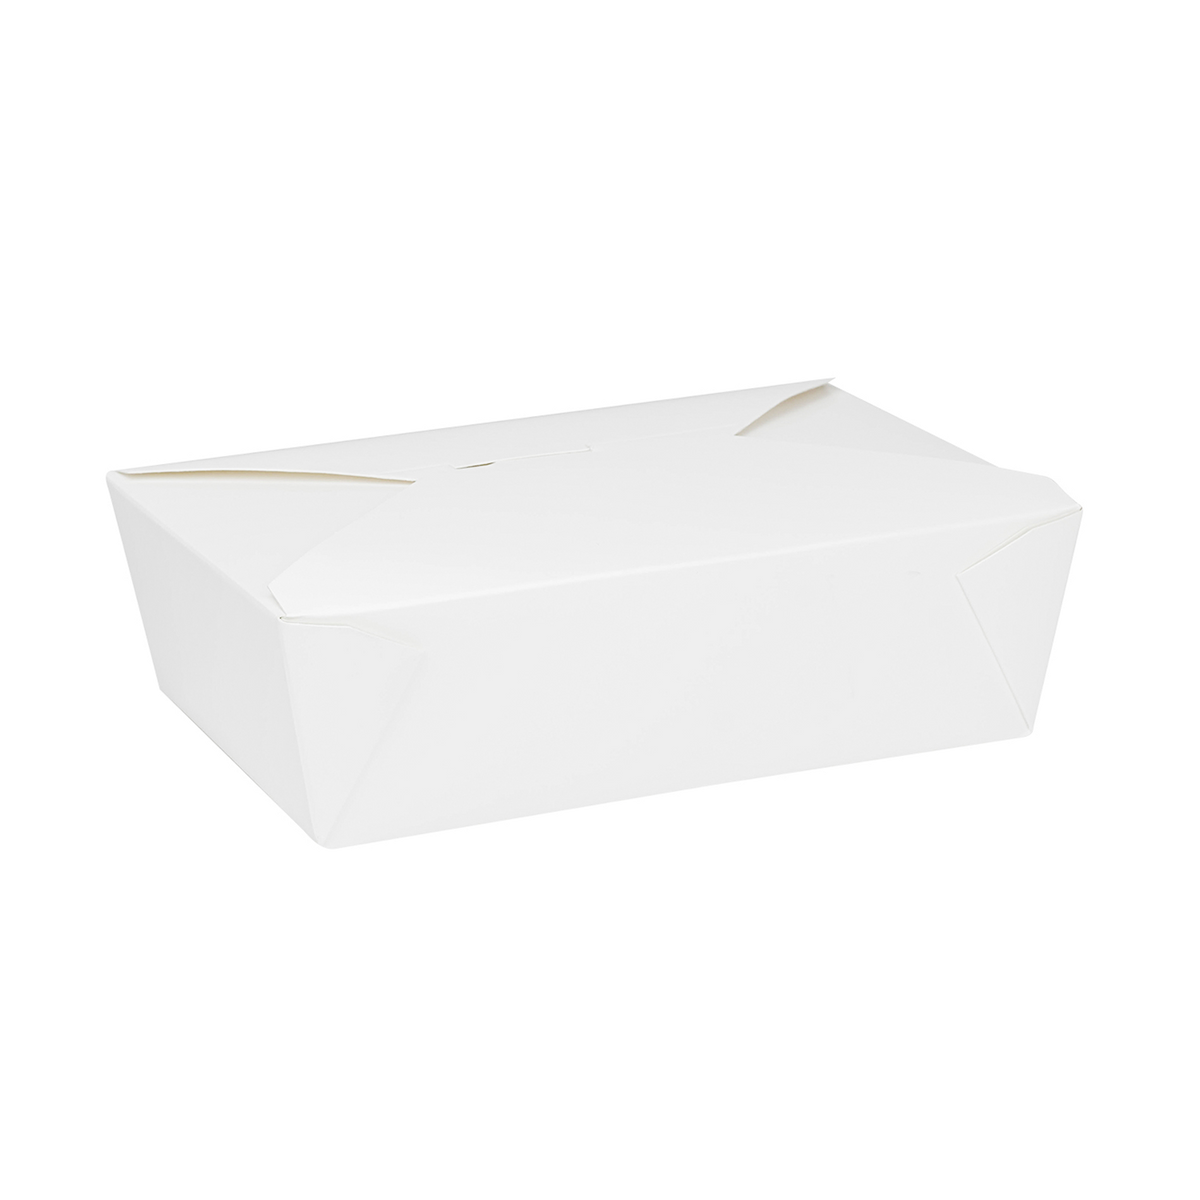 #3 White Paper Folding Food Takeout Containers – 7-3/4in x 5-1/2in x  2-1/2in – 66oz – 200 per case